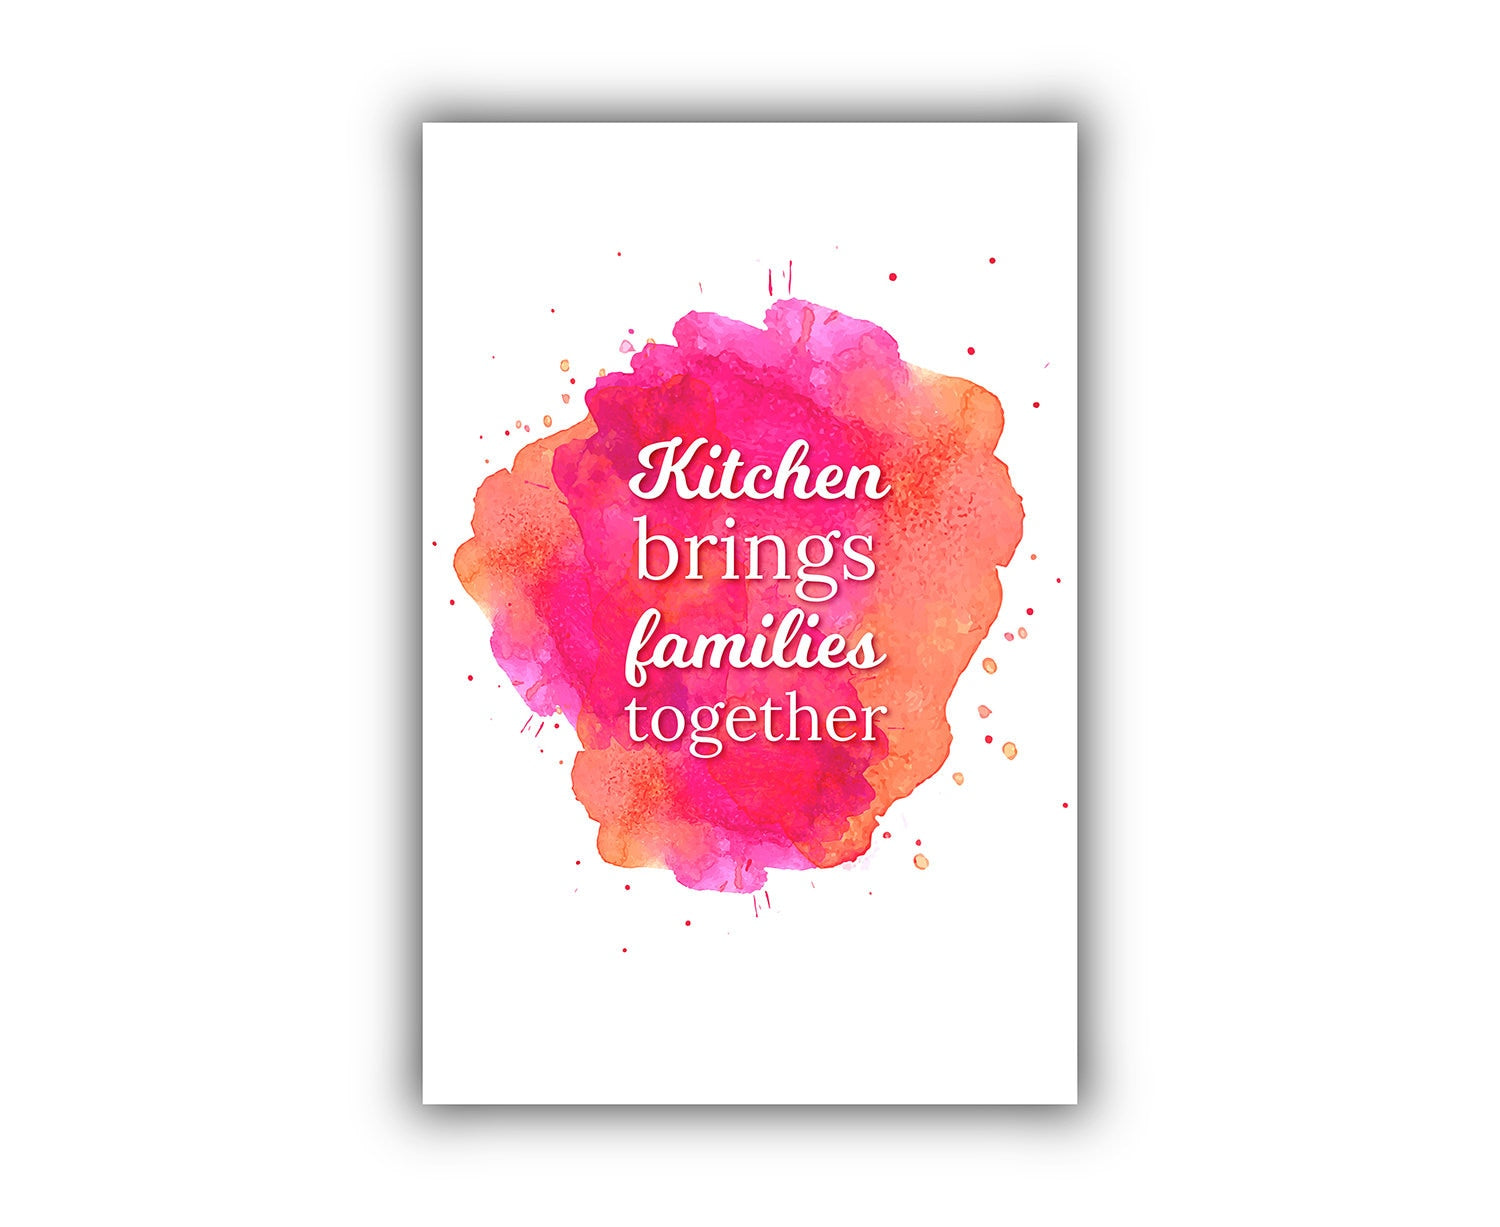 Kitchen brings families together, Quotes Poster Print